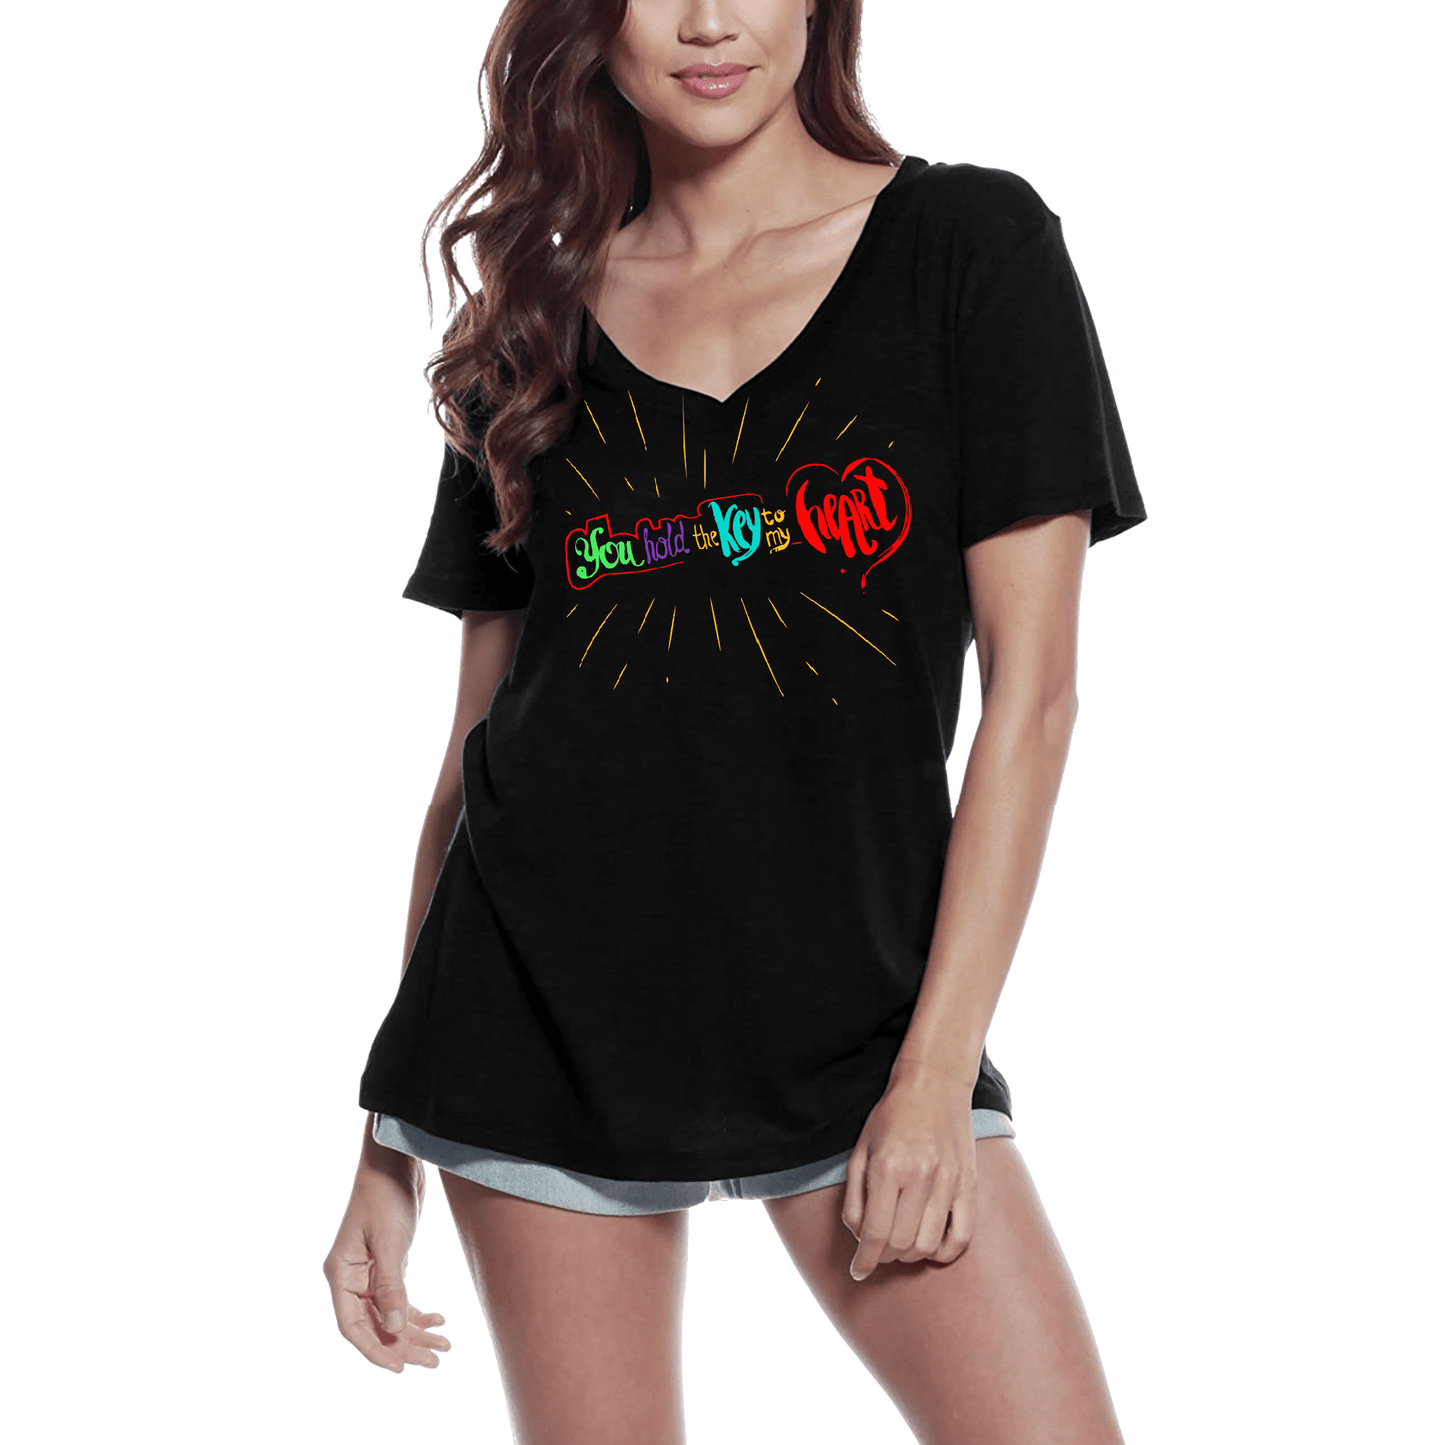 ULTRABASIC Women's T-Shirt You Hold The Key To My Heart - Valentine's Day Short Sleeve Graphic Tees Tops